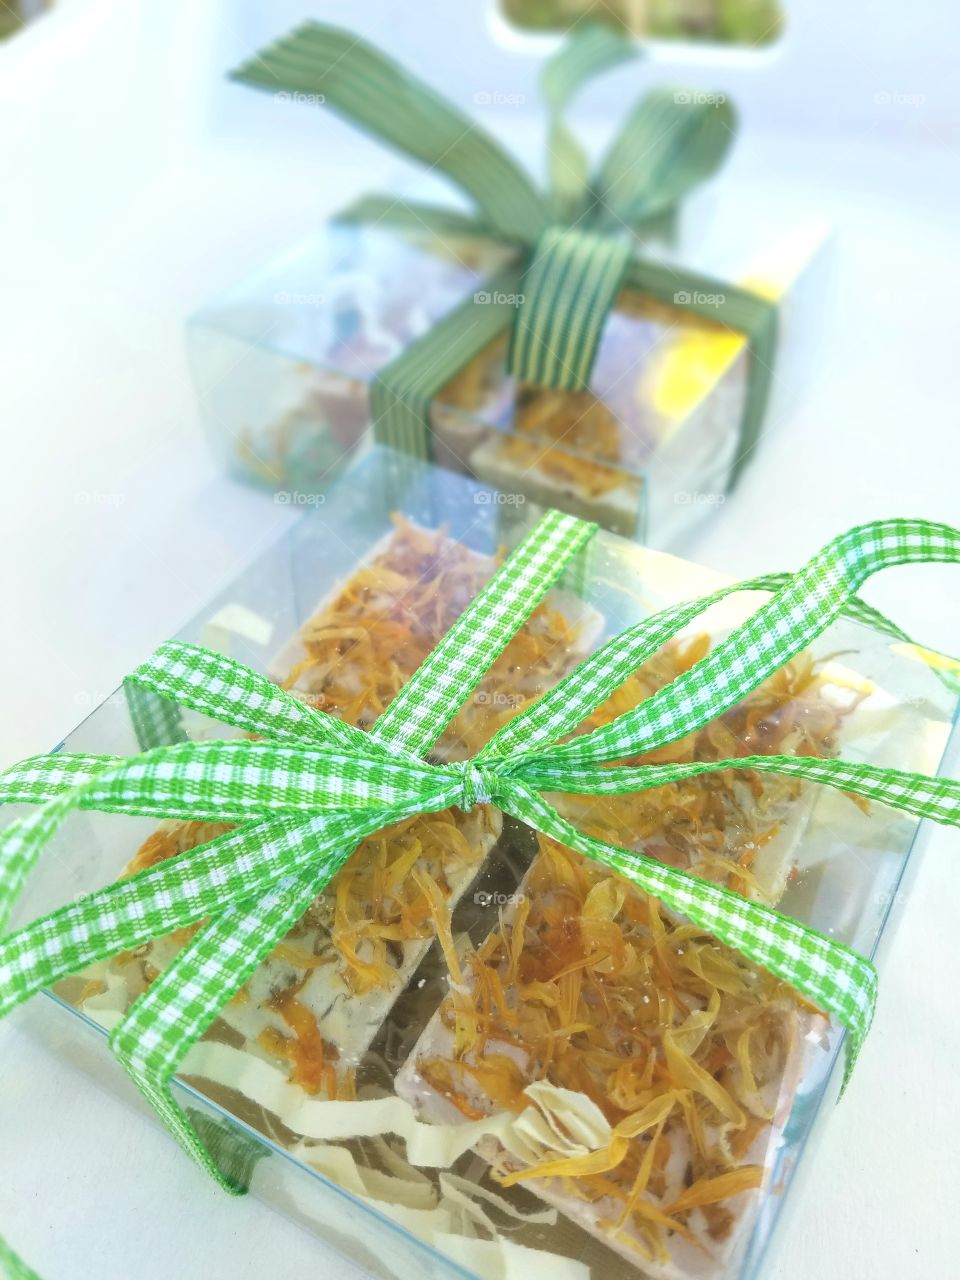 two gifts of artisan soap in clear boxes bound by patterned green ribbons